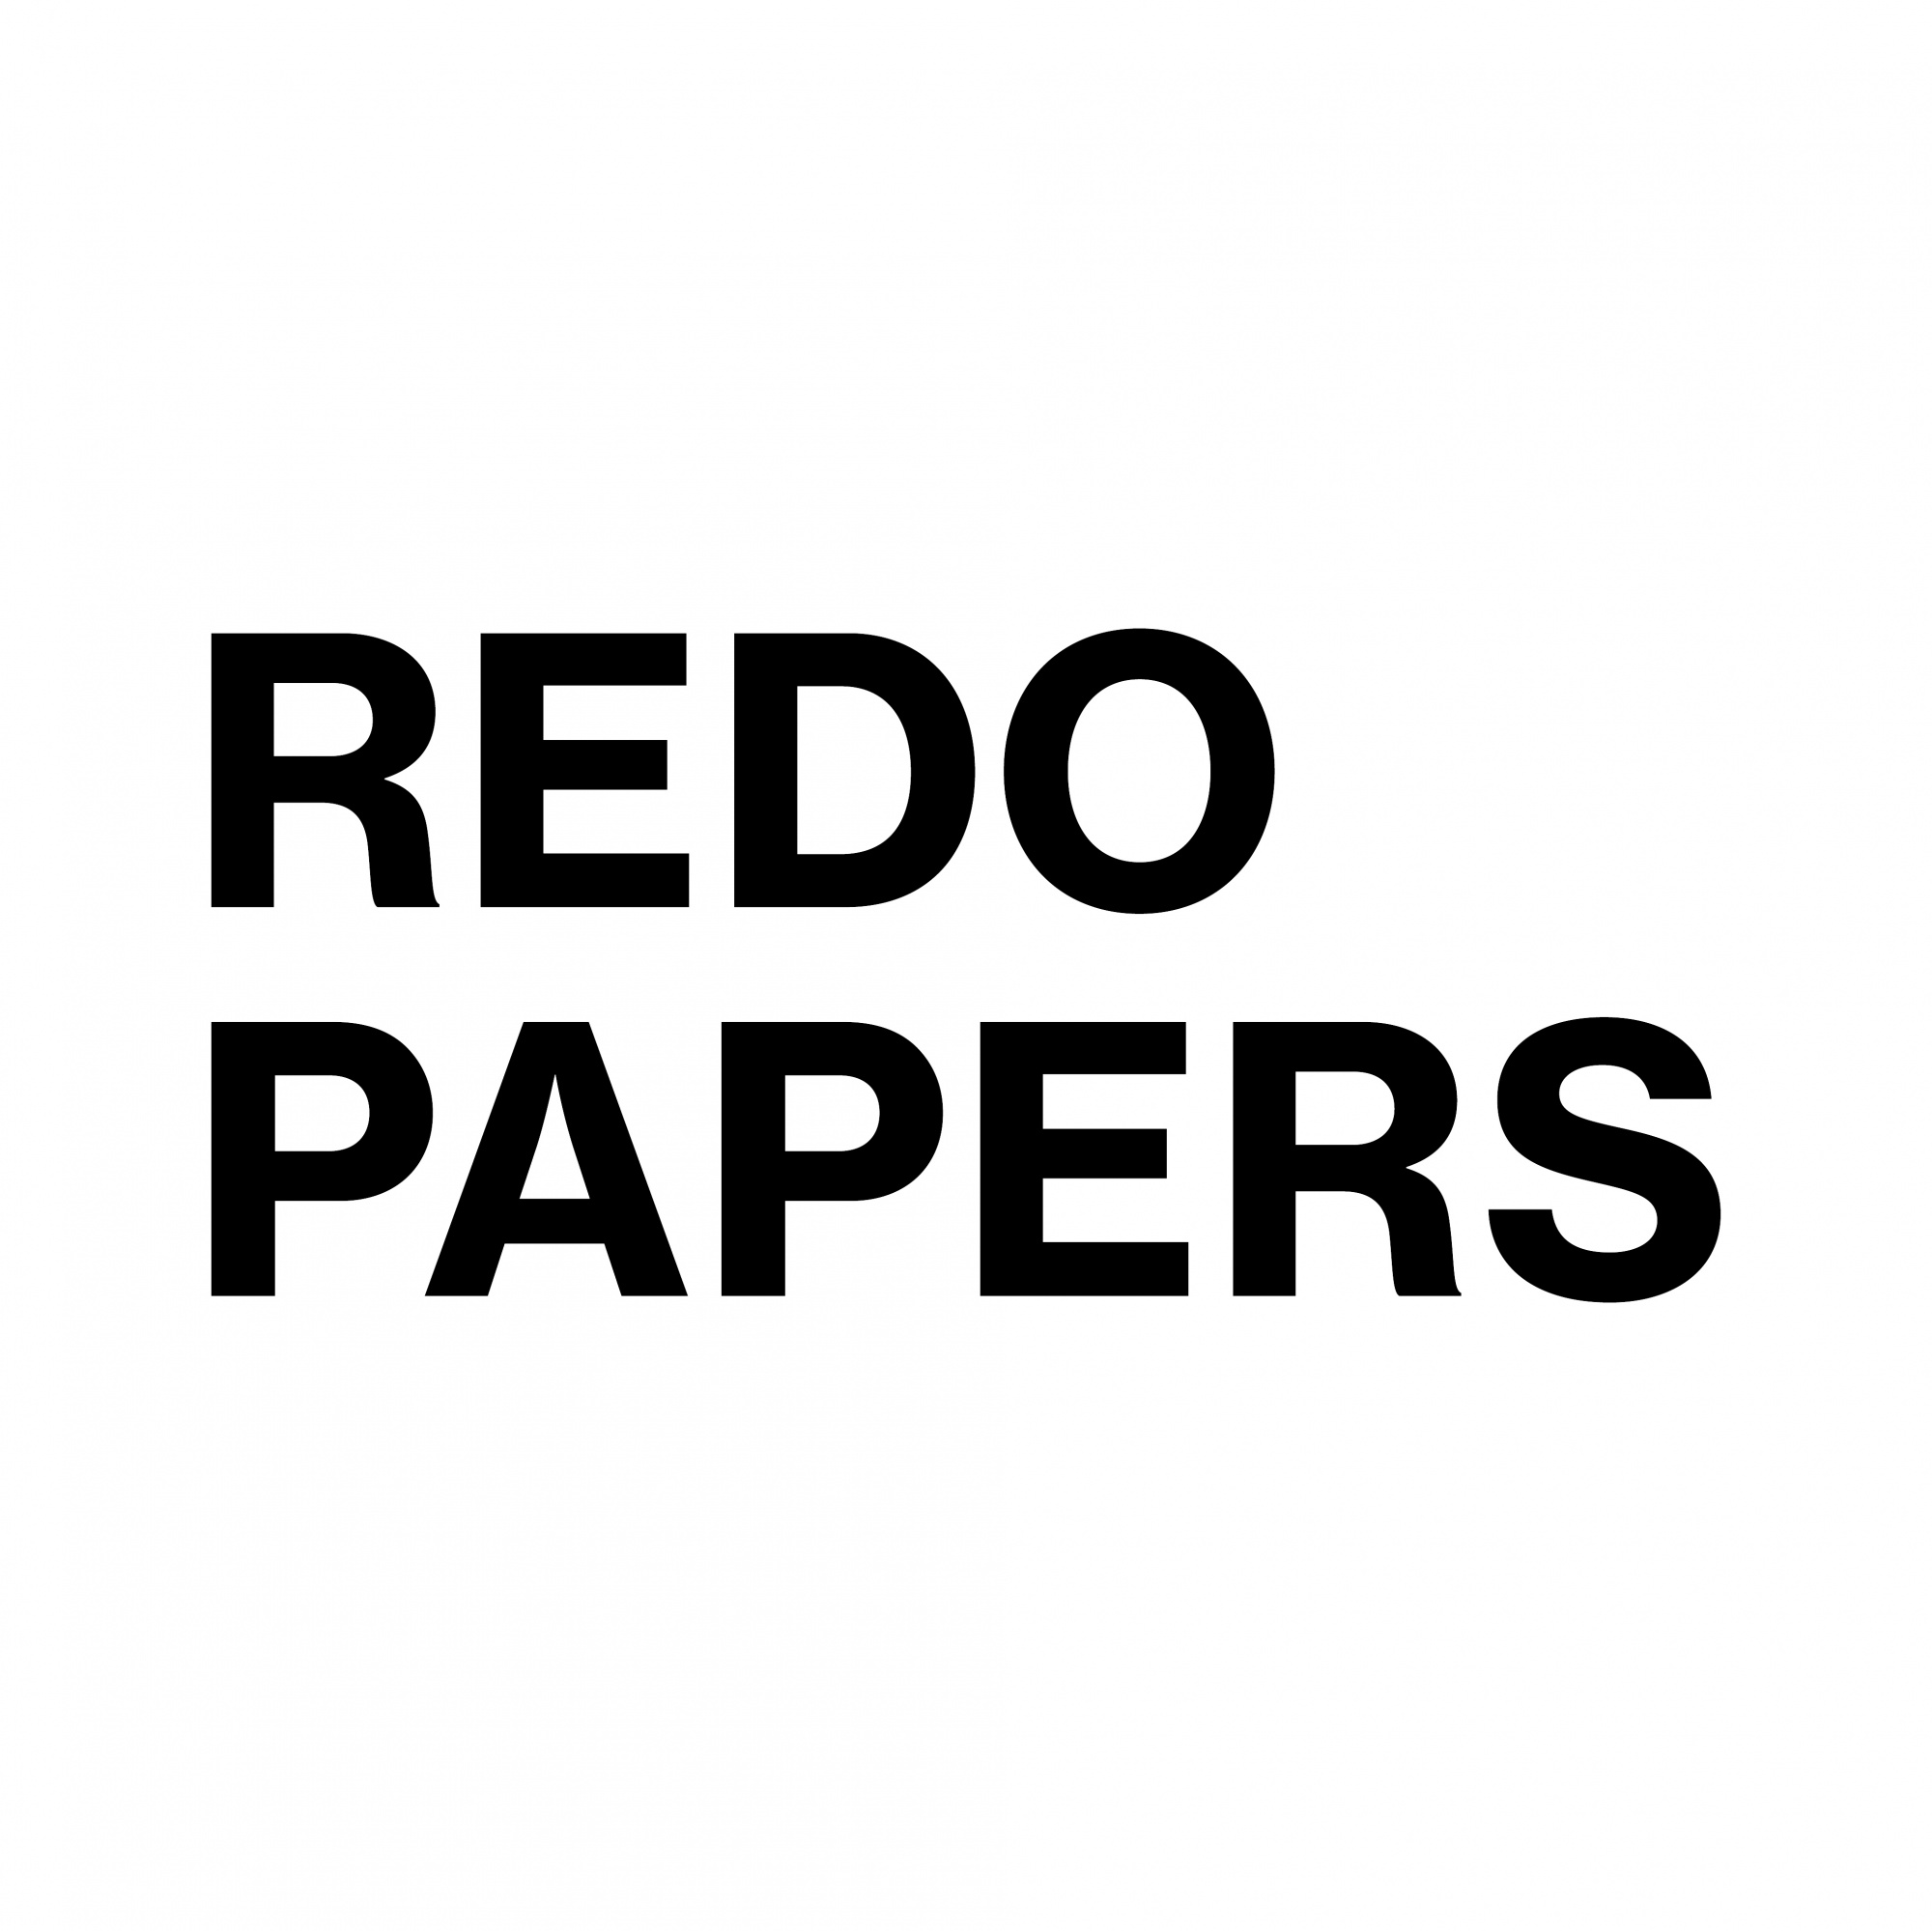 Redopapers